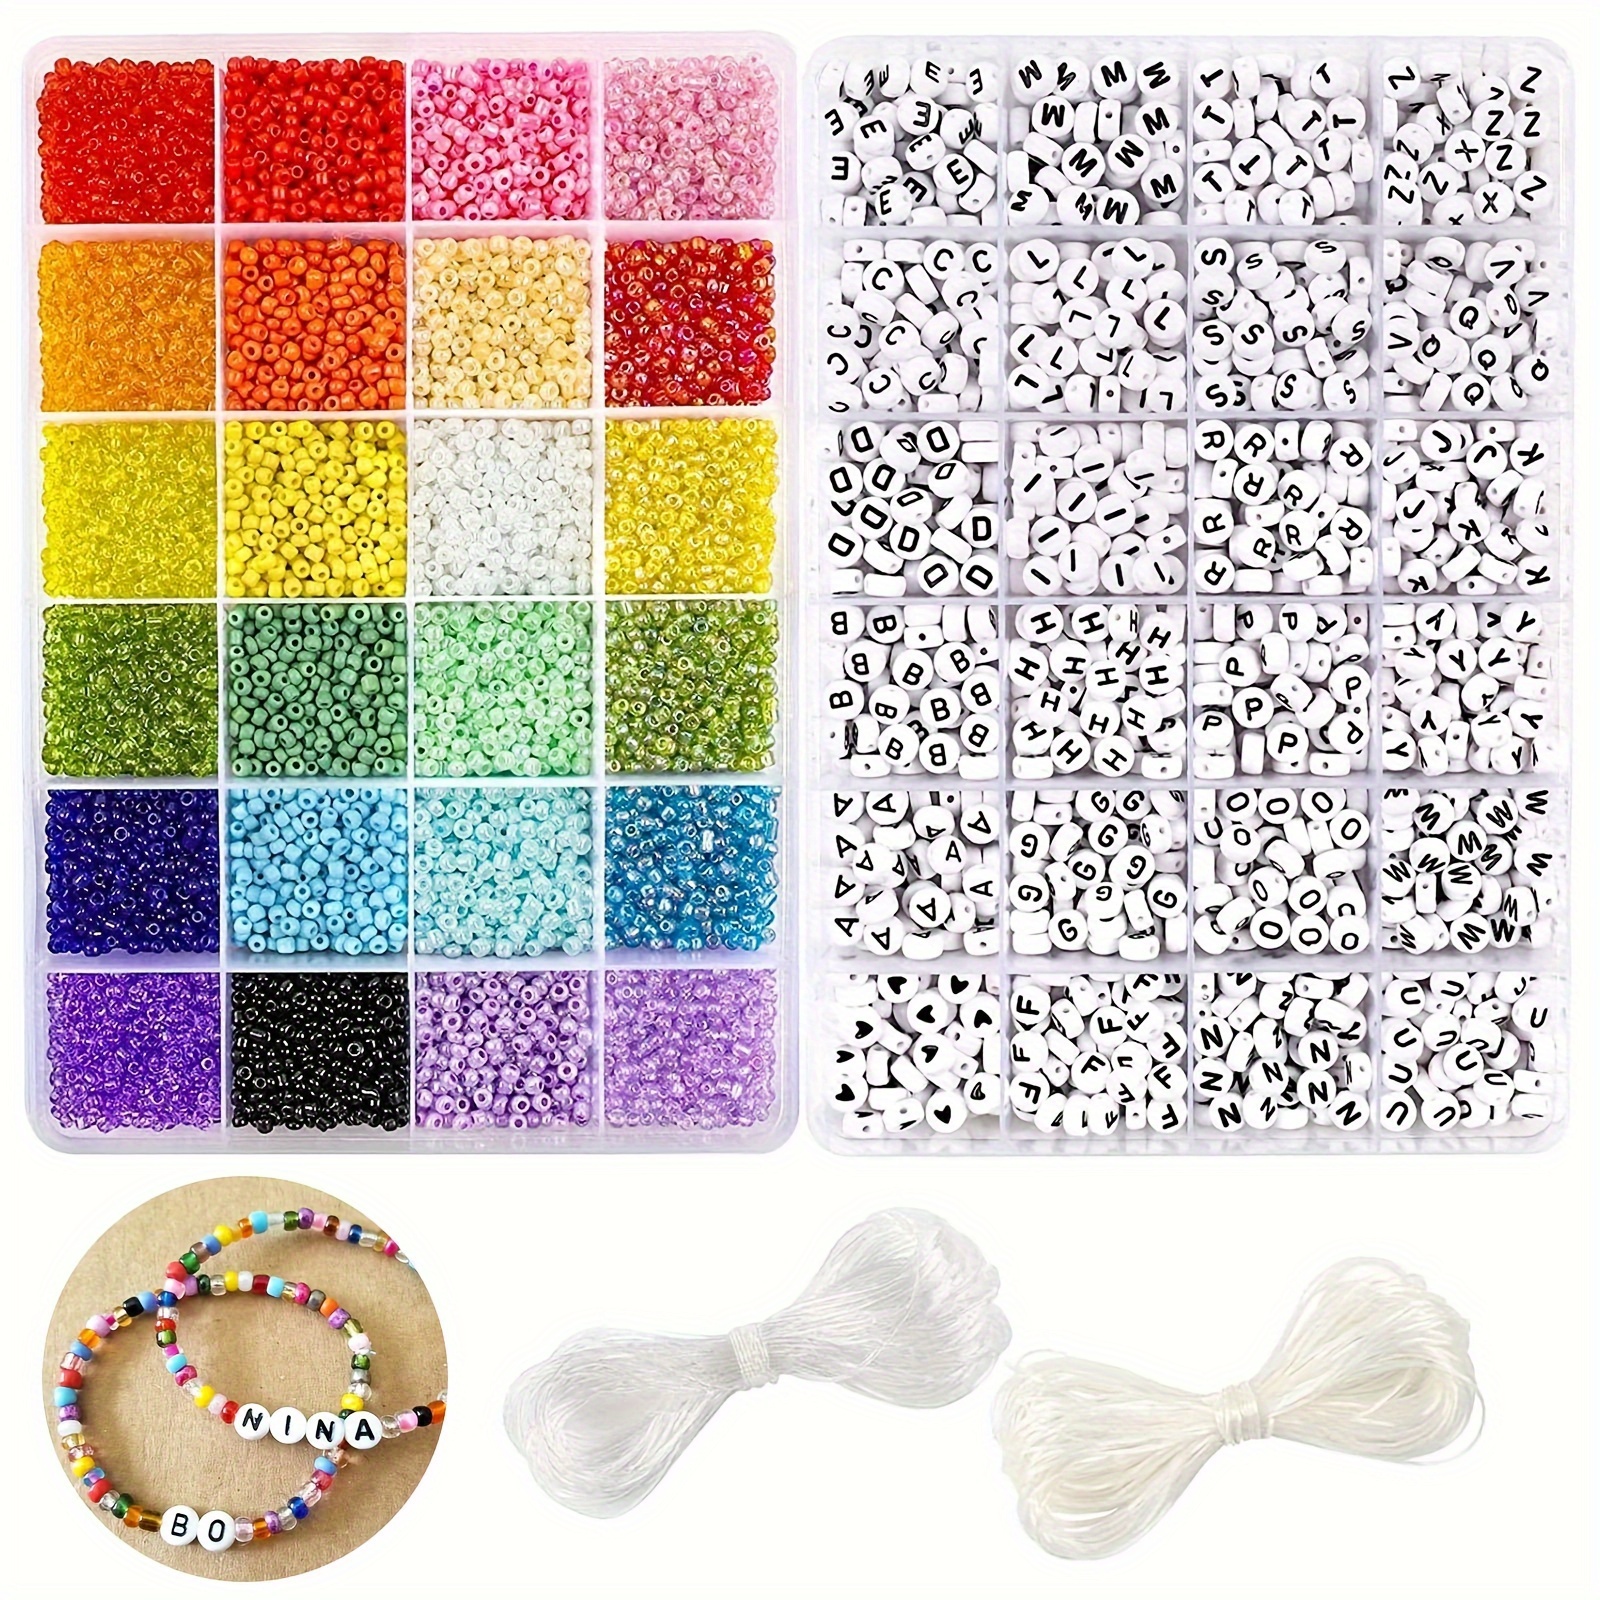 5000 Pcs Clay Beads for Jewelry Making,24 Color 3MM Glass Seed